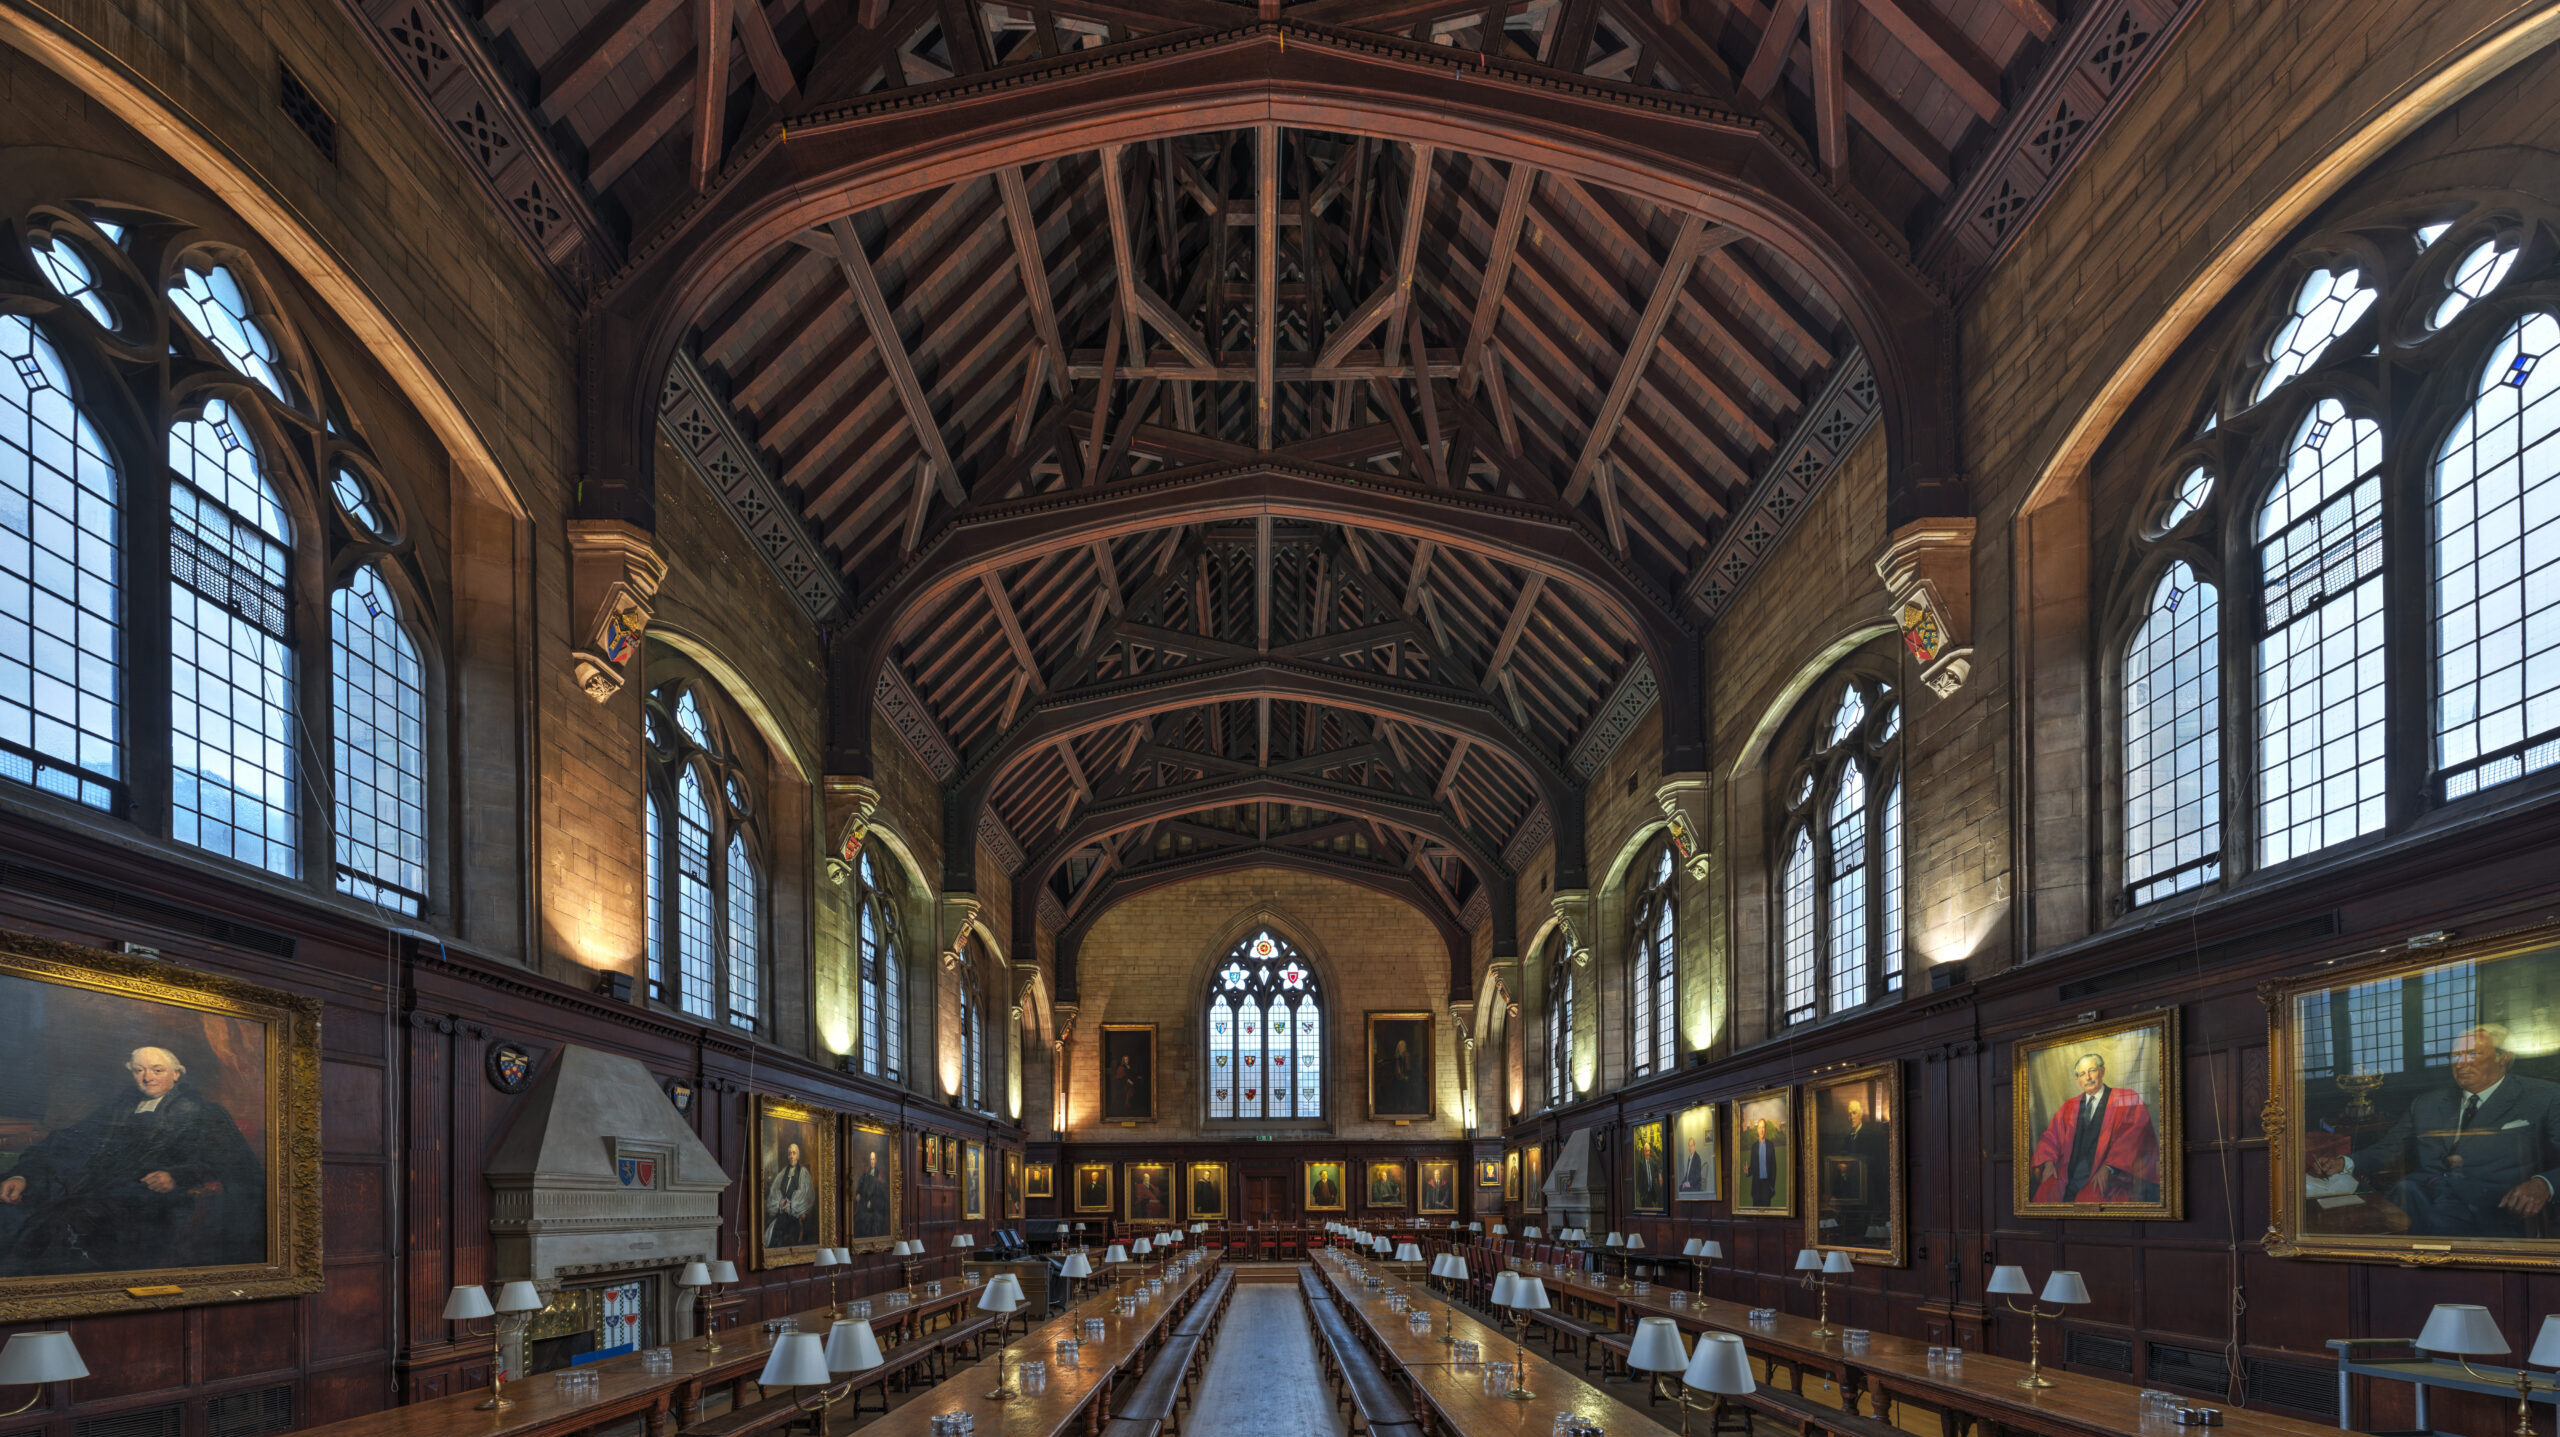 An image of Balliol College dining hall, with tables and chairs, representing a home. "Balliol College Dining Hall, Oxford - Diliff" by Diliff is licensed under CC BY-SA 3.0.